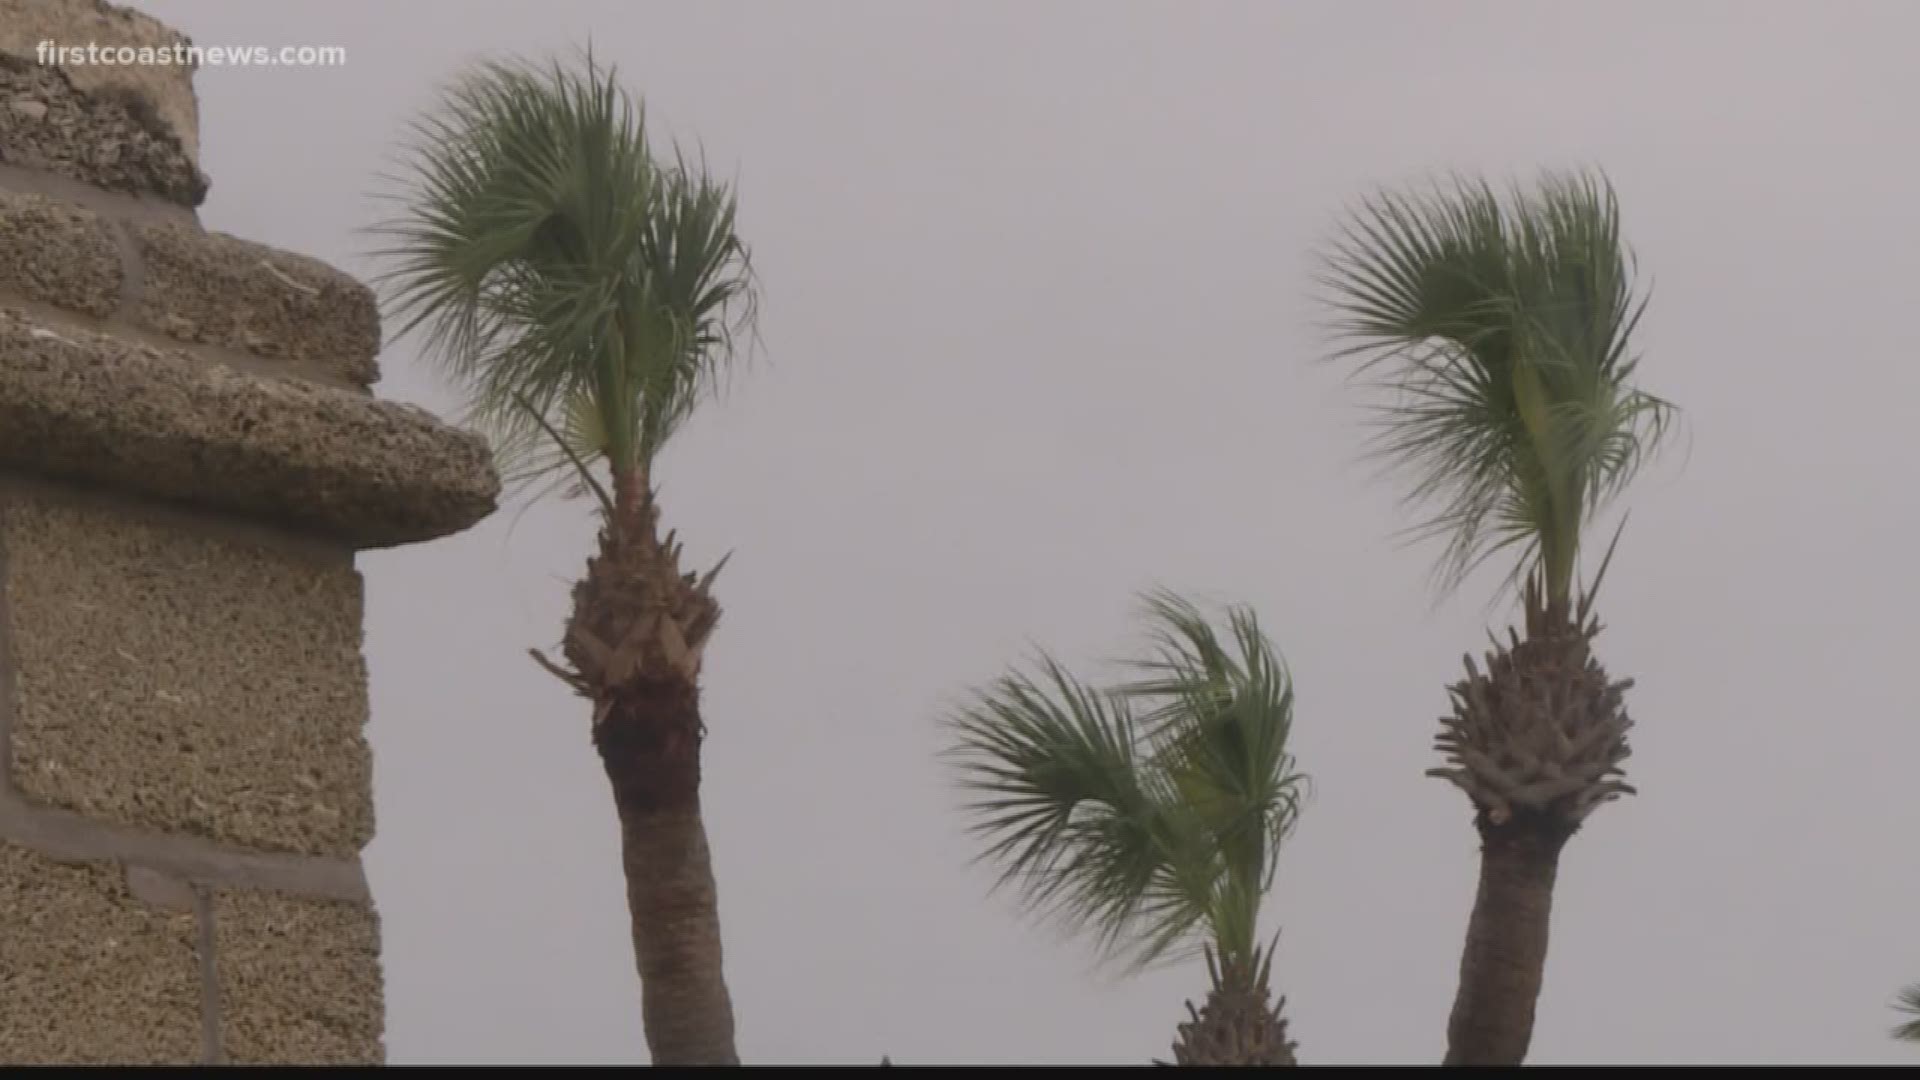 Not only is it illegal, but arborists say it could pose a problem during hurricane season.